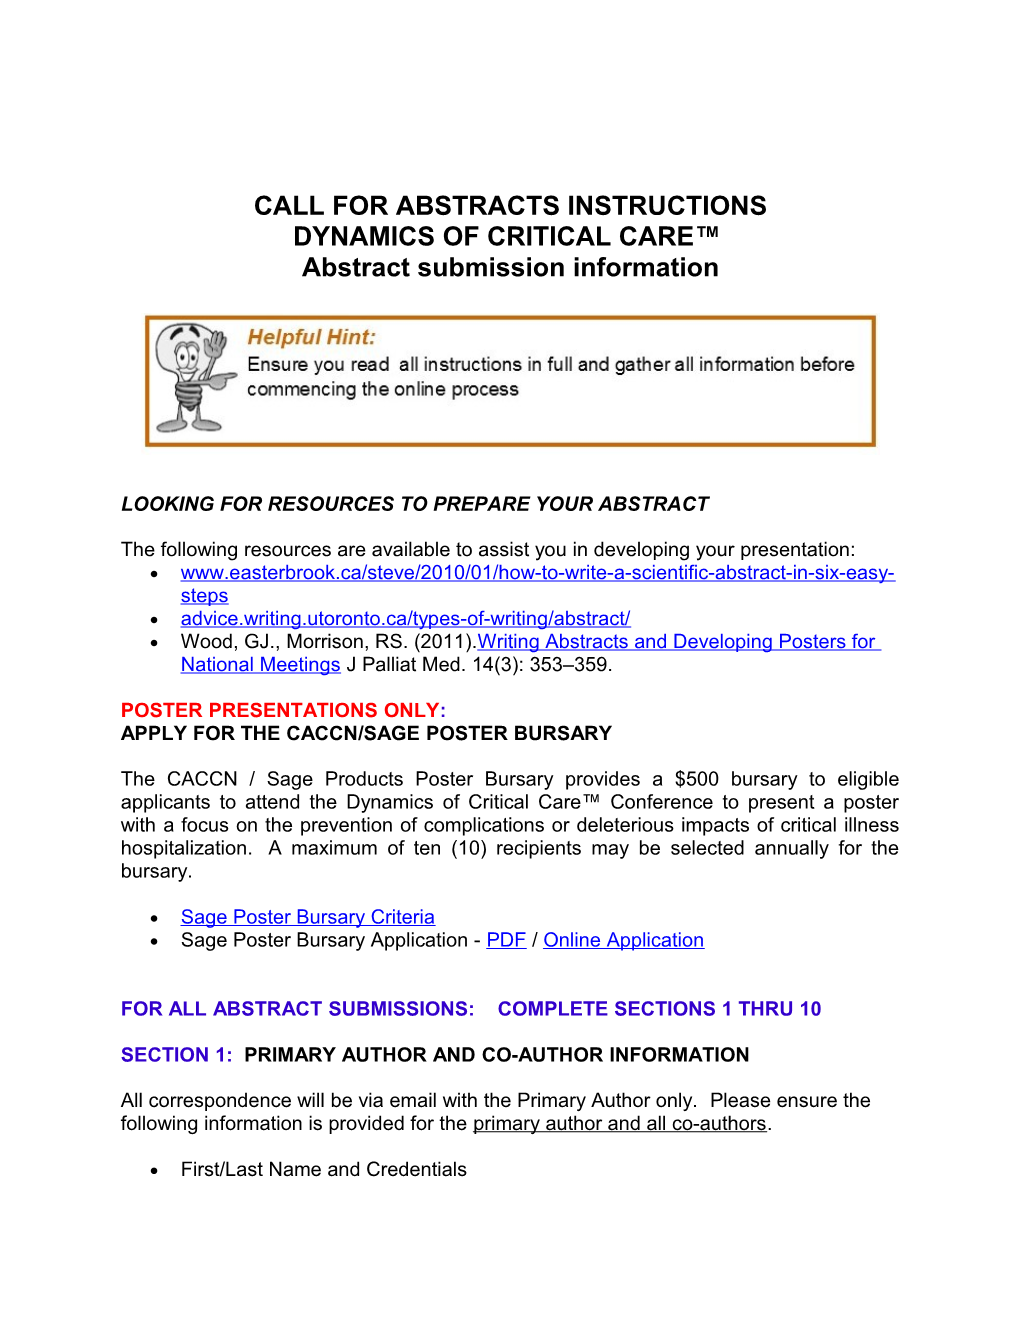 CALL for ABSTRACTS INSTRUCTIONS DYNAMICS of CRITICAL CARE Abstract Submission Information